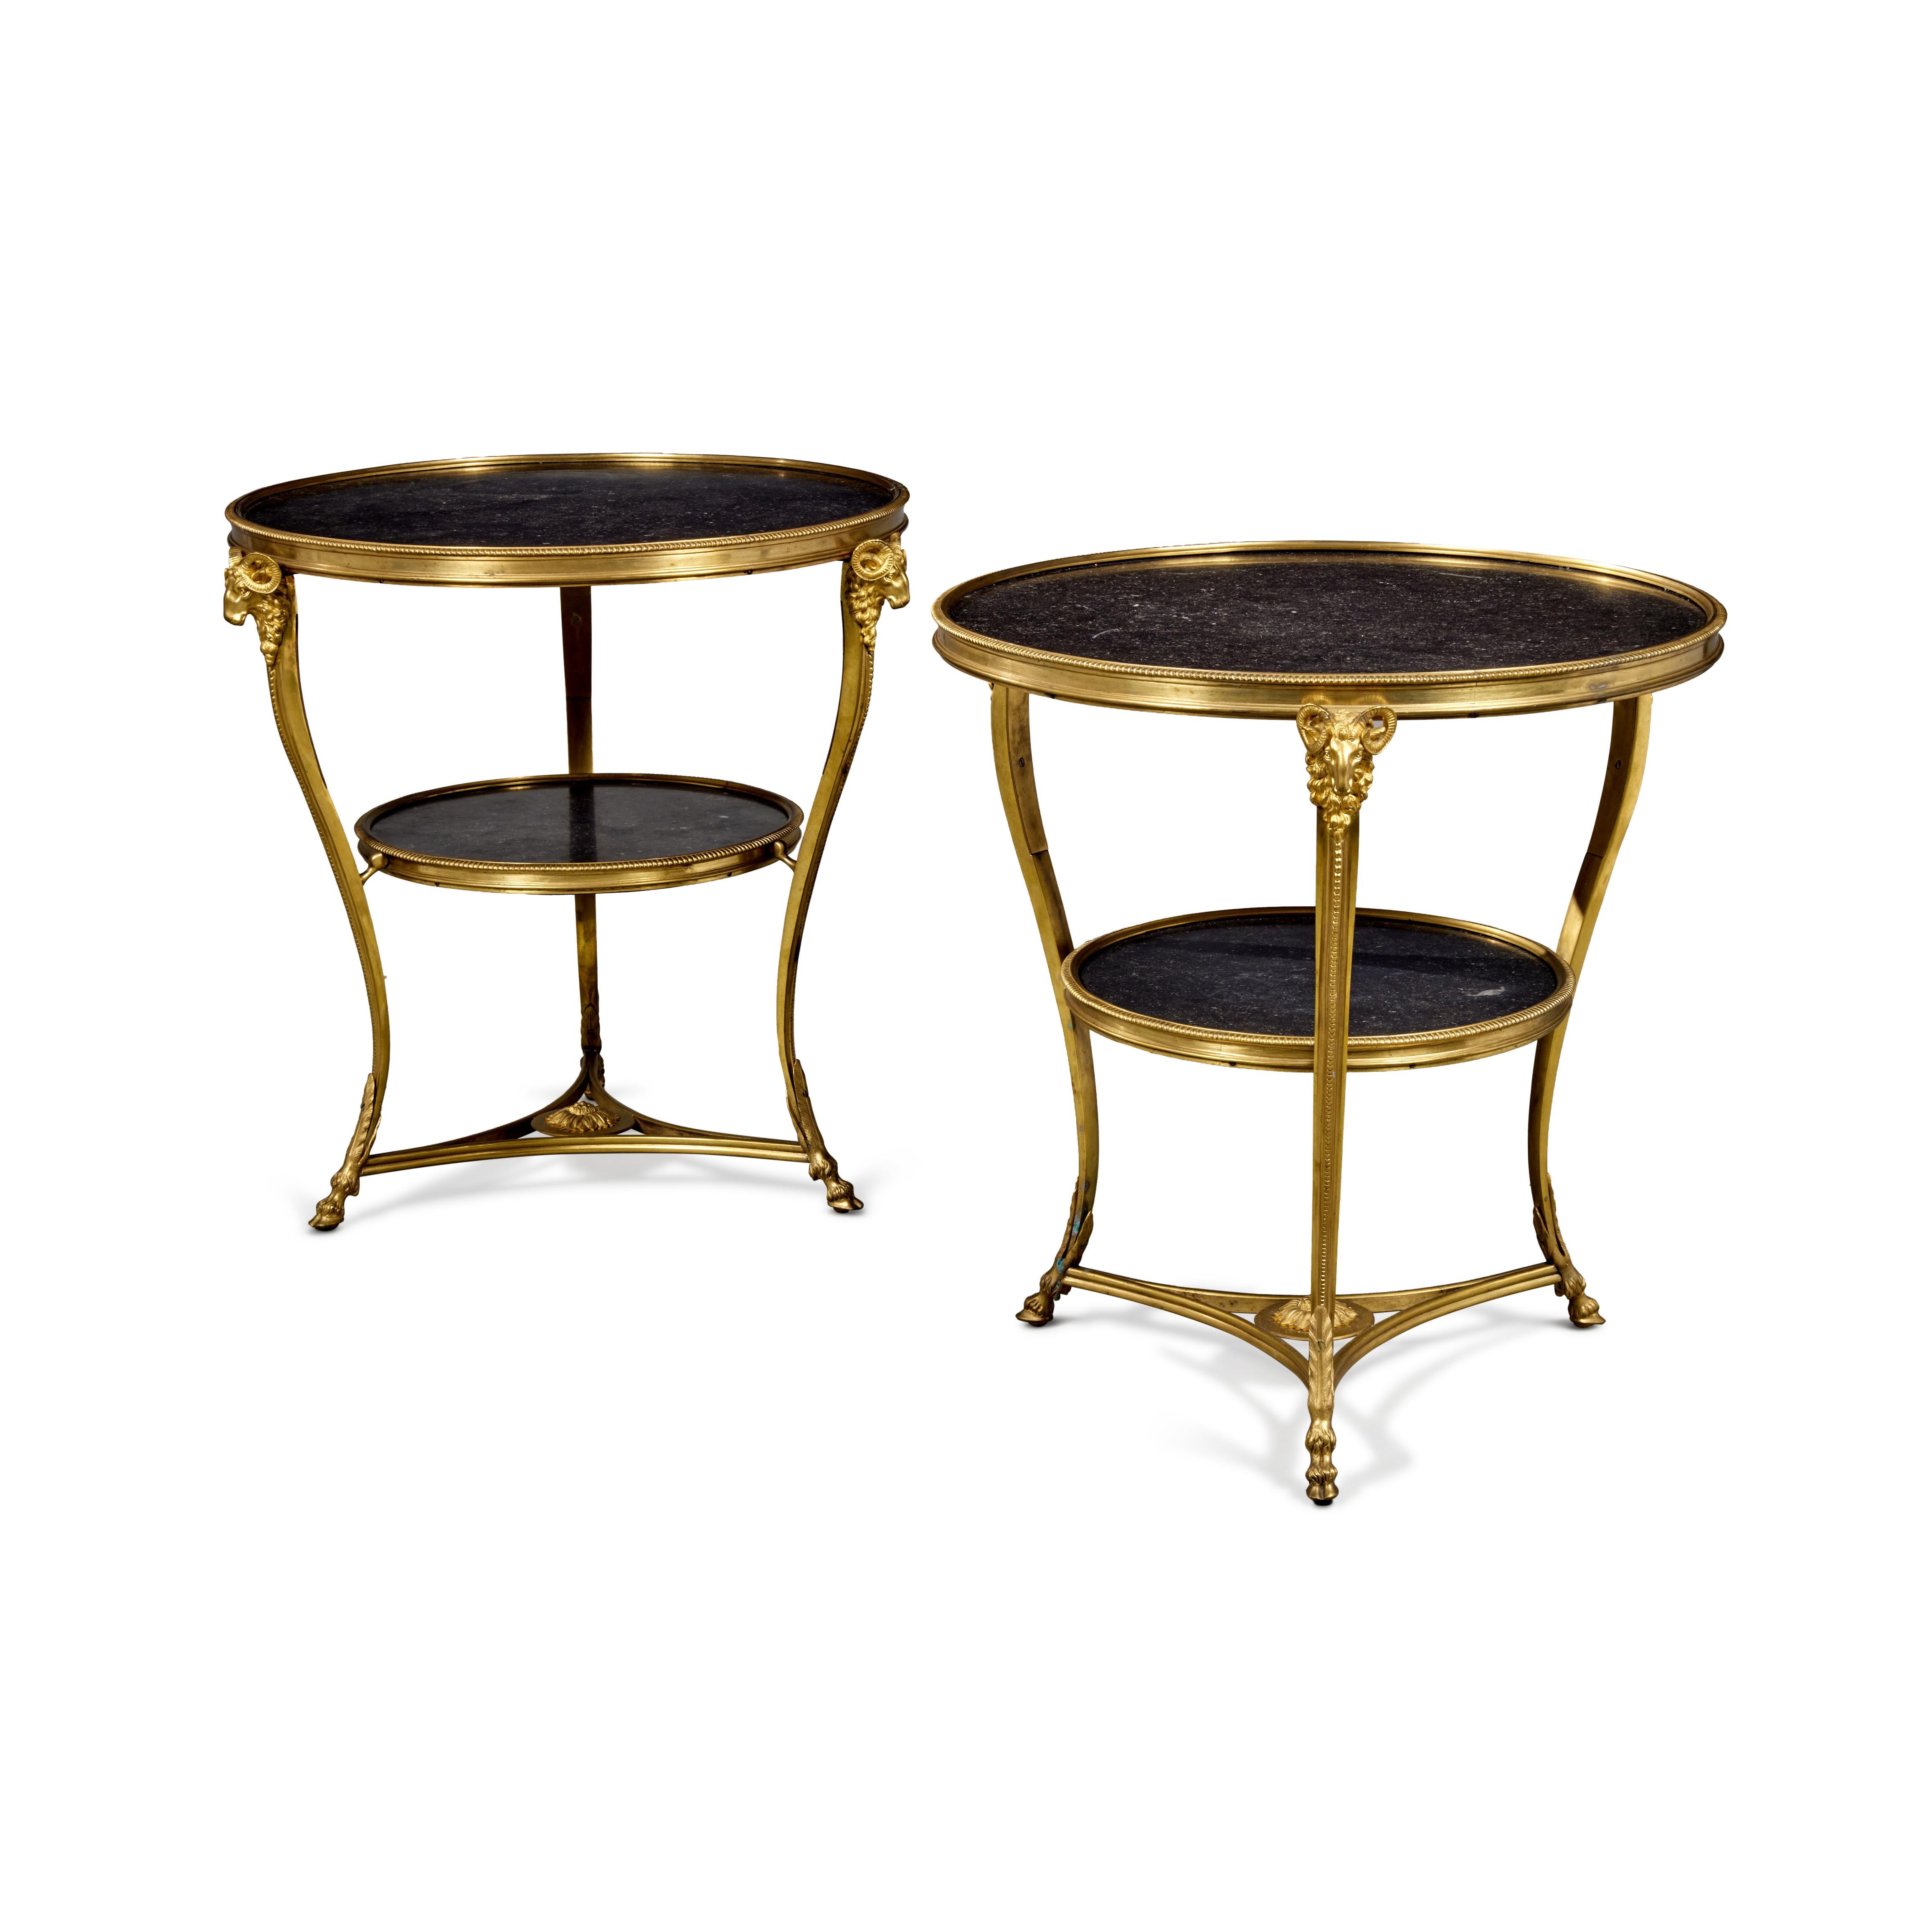 A Pair of 1890-1900 Directoire Style Gilt Bronze and Black Marble Gueridons. Each with very fine ormolu mounts as well as hand-carved marble tops. Exceptional details on the ormolu including three ram's heads on either side of the legs. This is